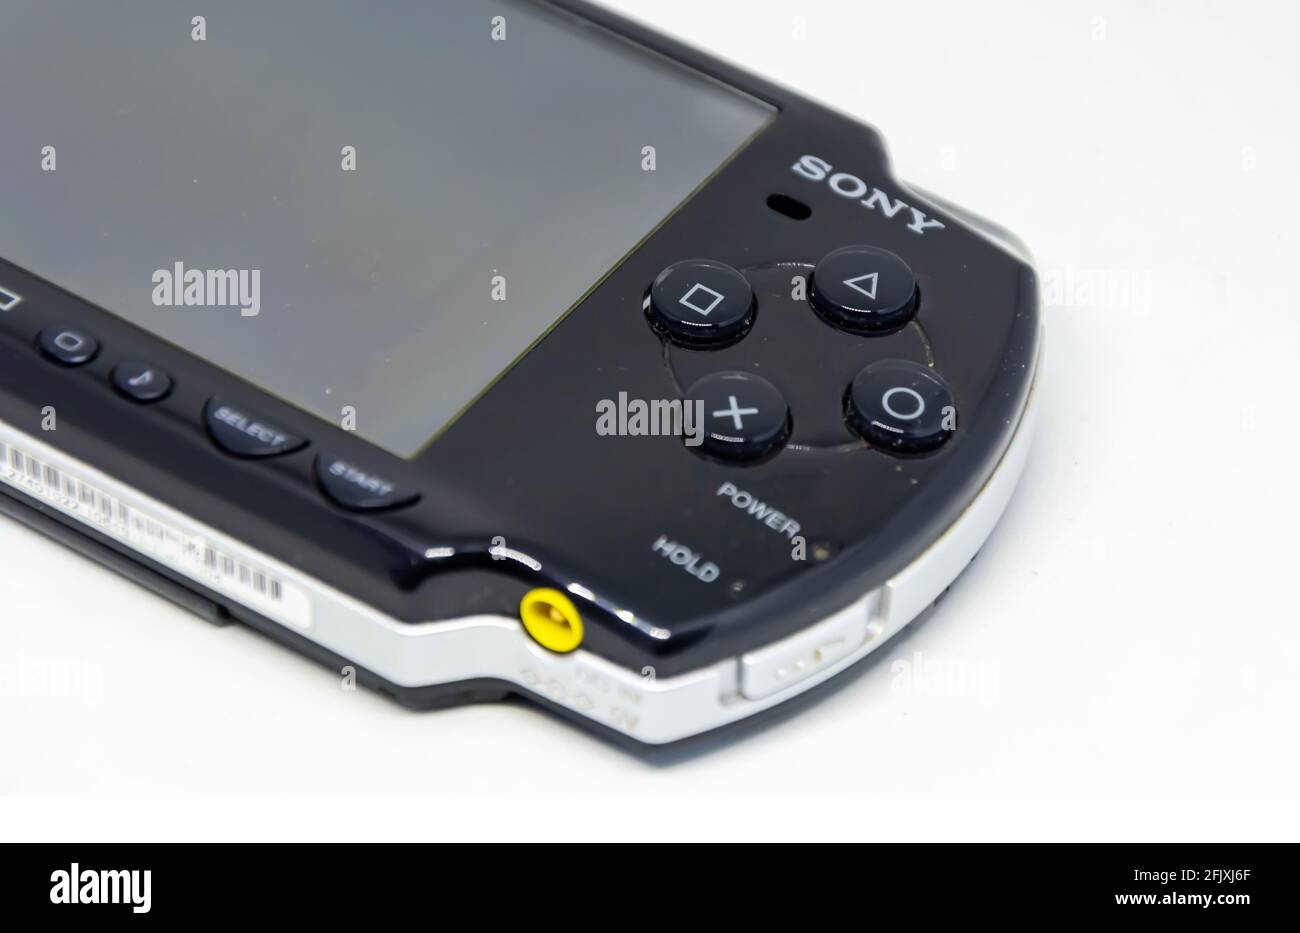 Rome, Italy, April 9th 2021: Side view of a Sony PlayStation Portable (PSP).  PSP is a handheld game console developed and marketed by Sony. Mobile ent  Stock Photo - Alamy